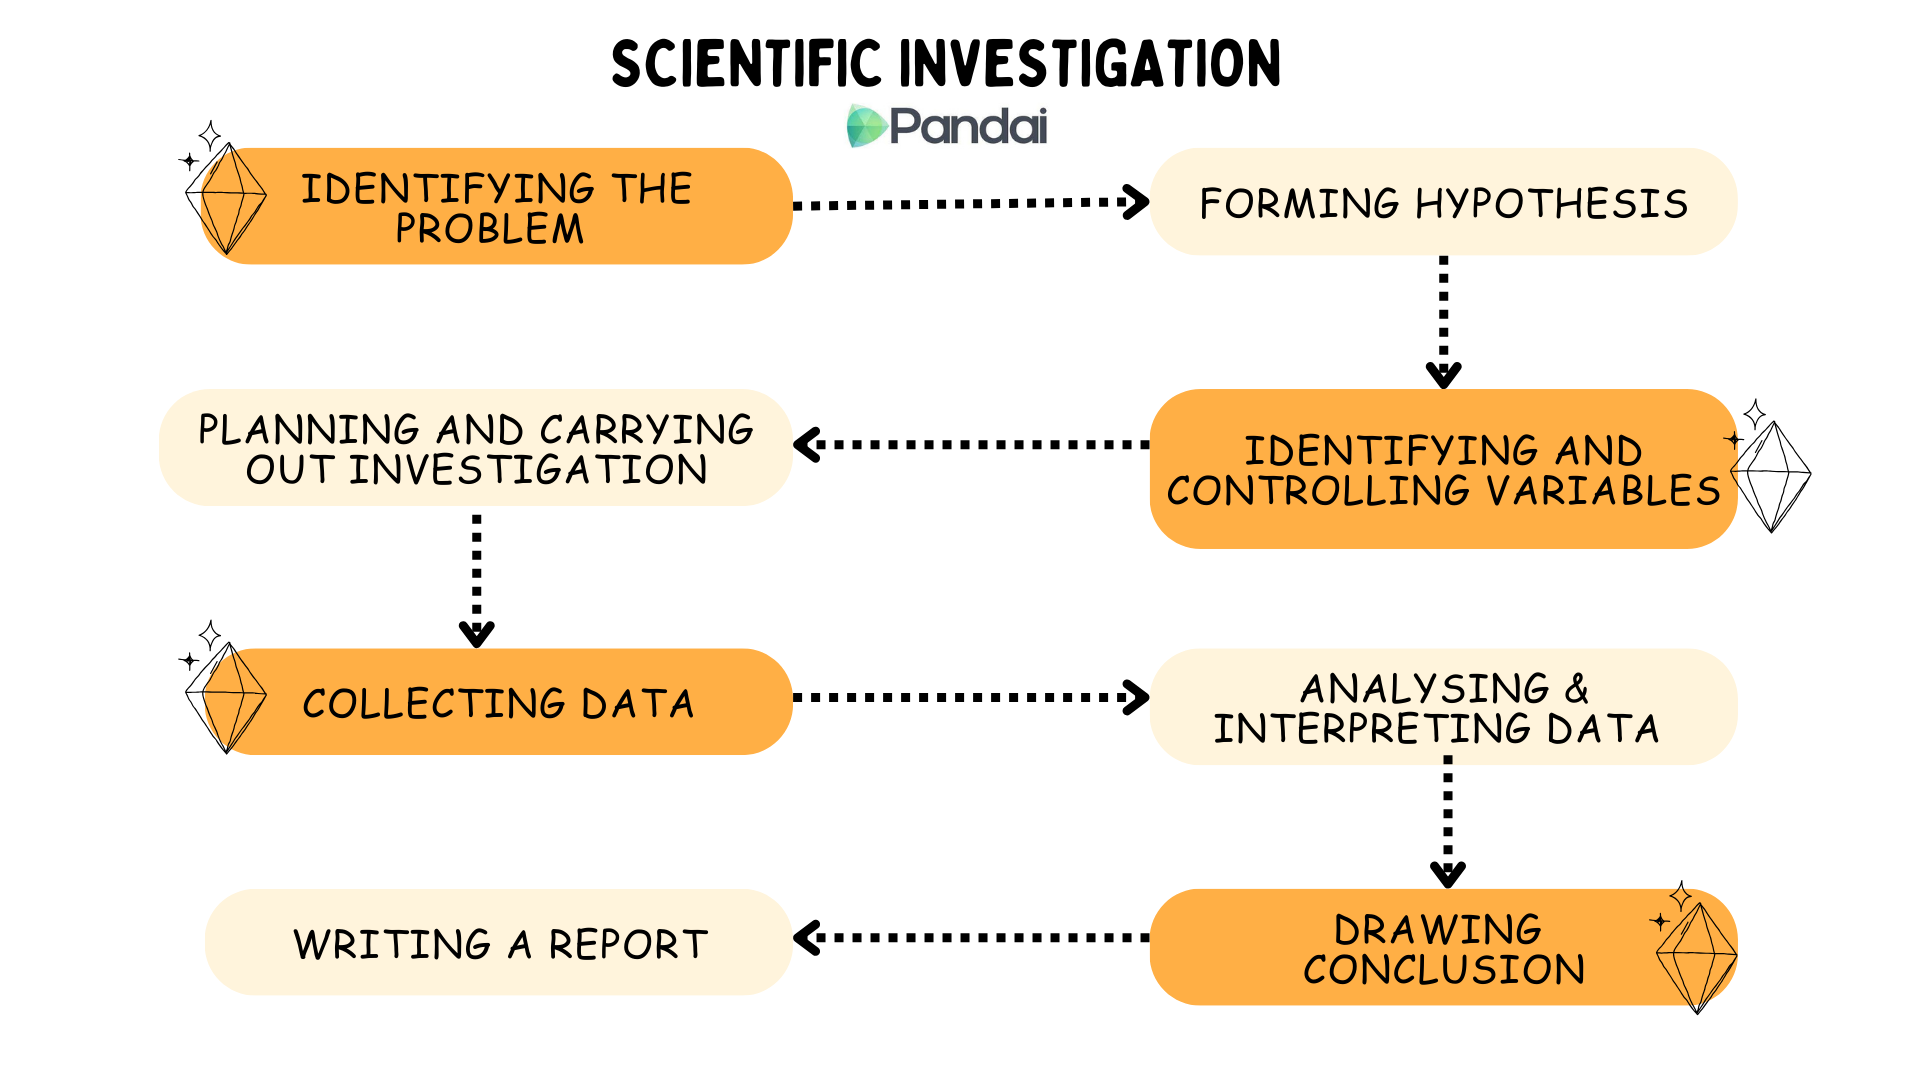 This image is a flowchart titled Scientific Investigation. It outlines the steps involved in a scientific investigation process. The steps are: 1. Identifying the Problem 2. Forming Hypothesis 3. Planning and Carrying Out Investigation 4. Identifying and Controlling Variables 5. Collecting Data 6. Analyzing & Interpreting Data 7. Writing a Report 8. Drawing Conclusion Arrows indicate the sequence of steps, showing the flow from one step to the next. 